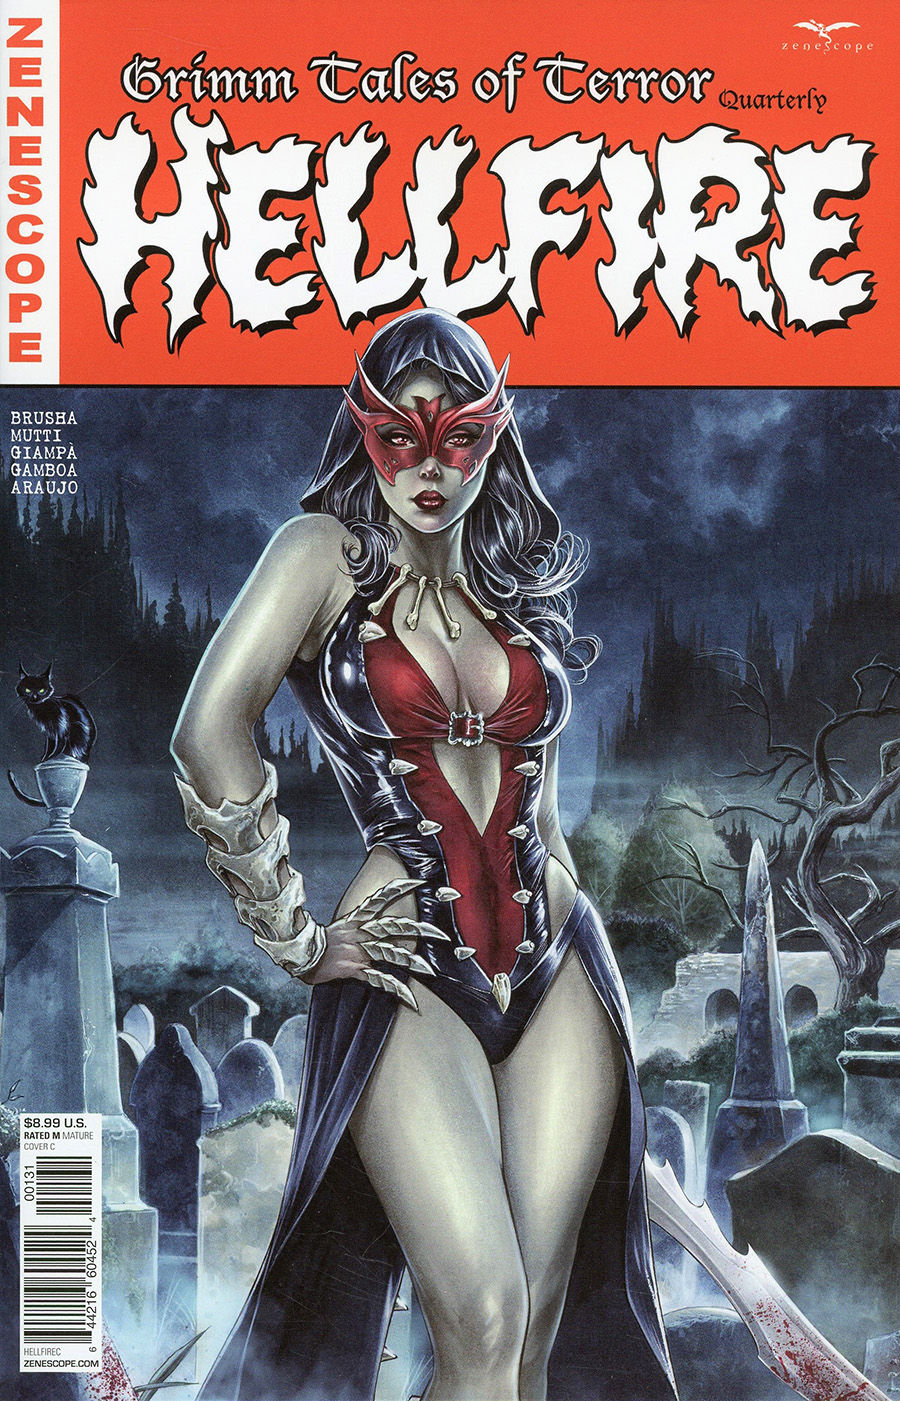 Grimm Fairy Tales Presents Grimm Tales Of Terror Quarterly #1 Hellfire Cover C Mike Krome